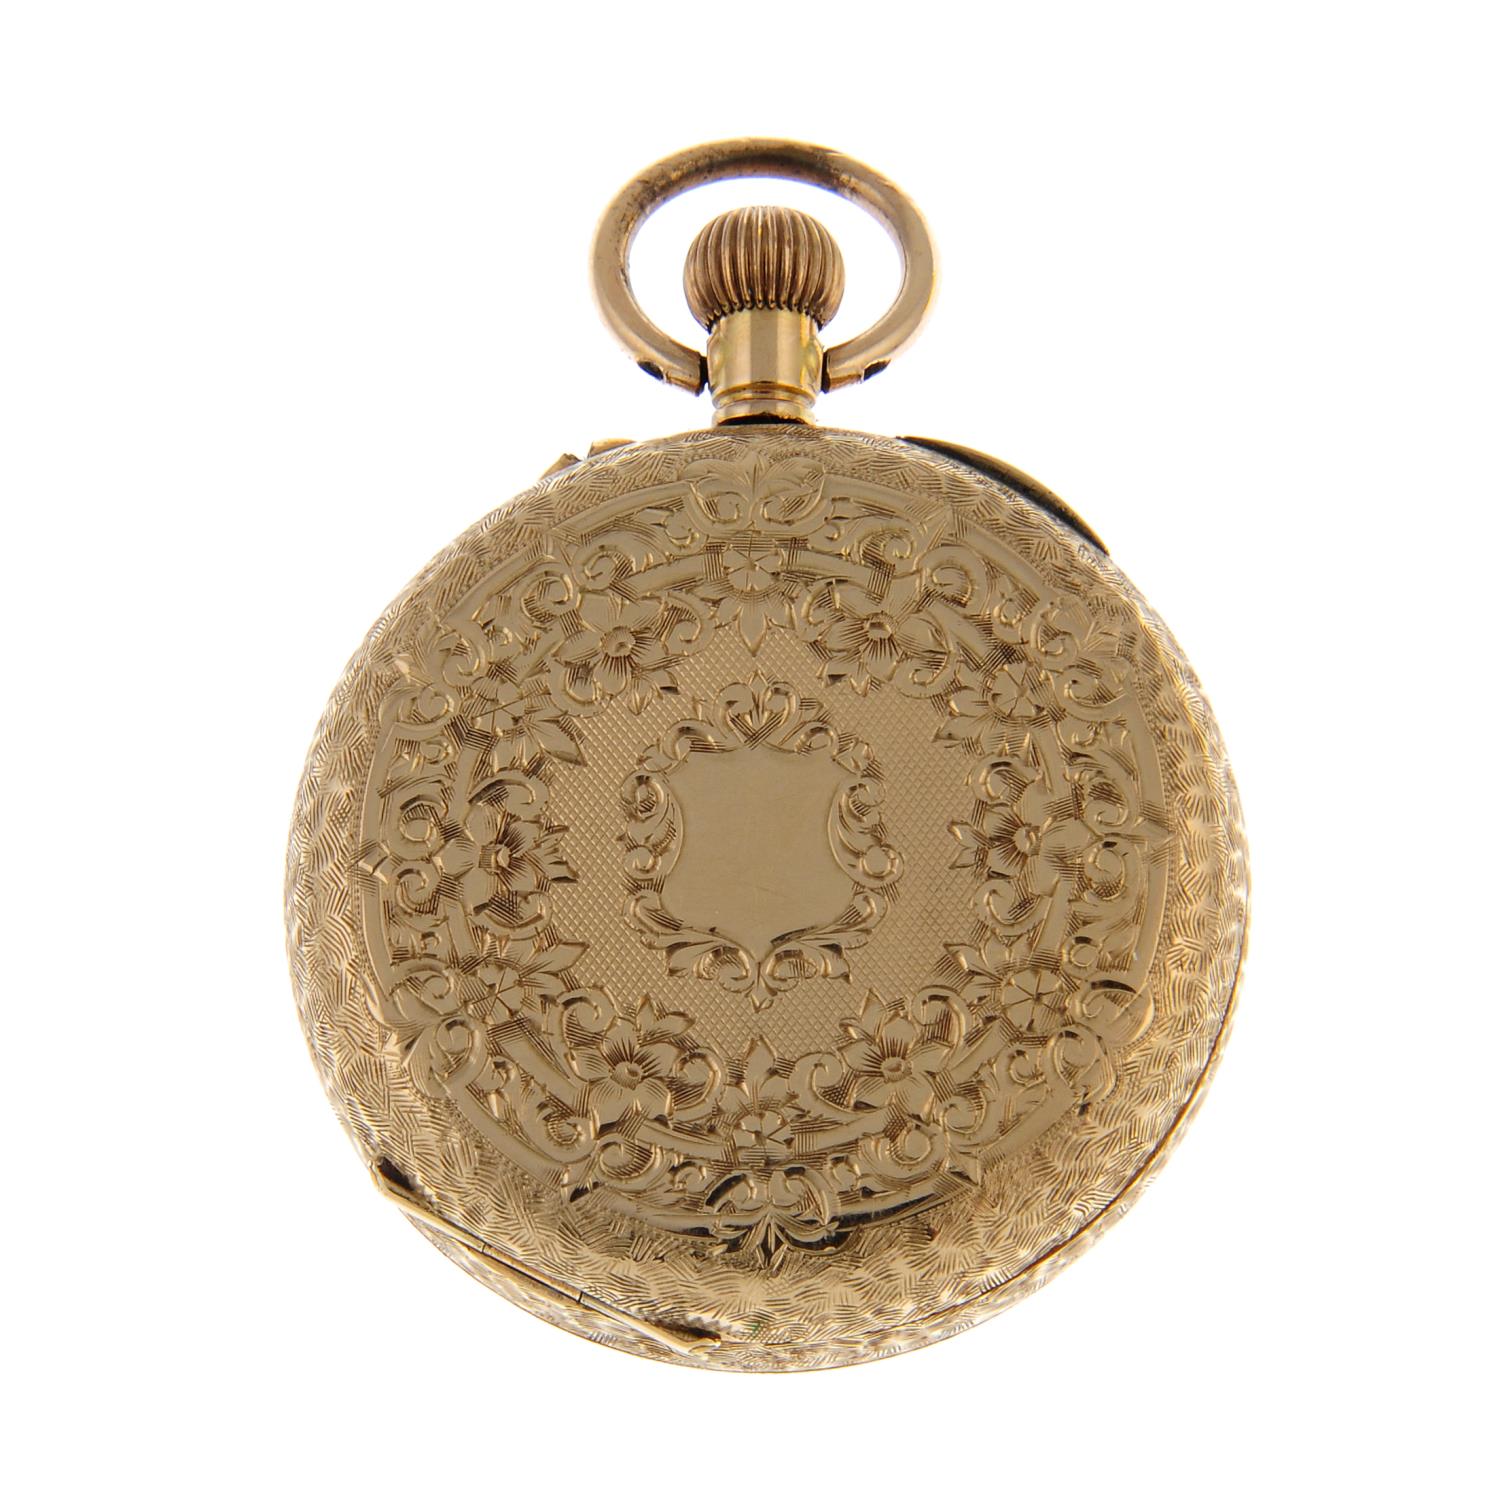 An open face pocket watch. - Image 2 of 3